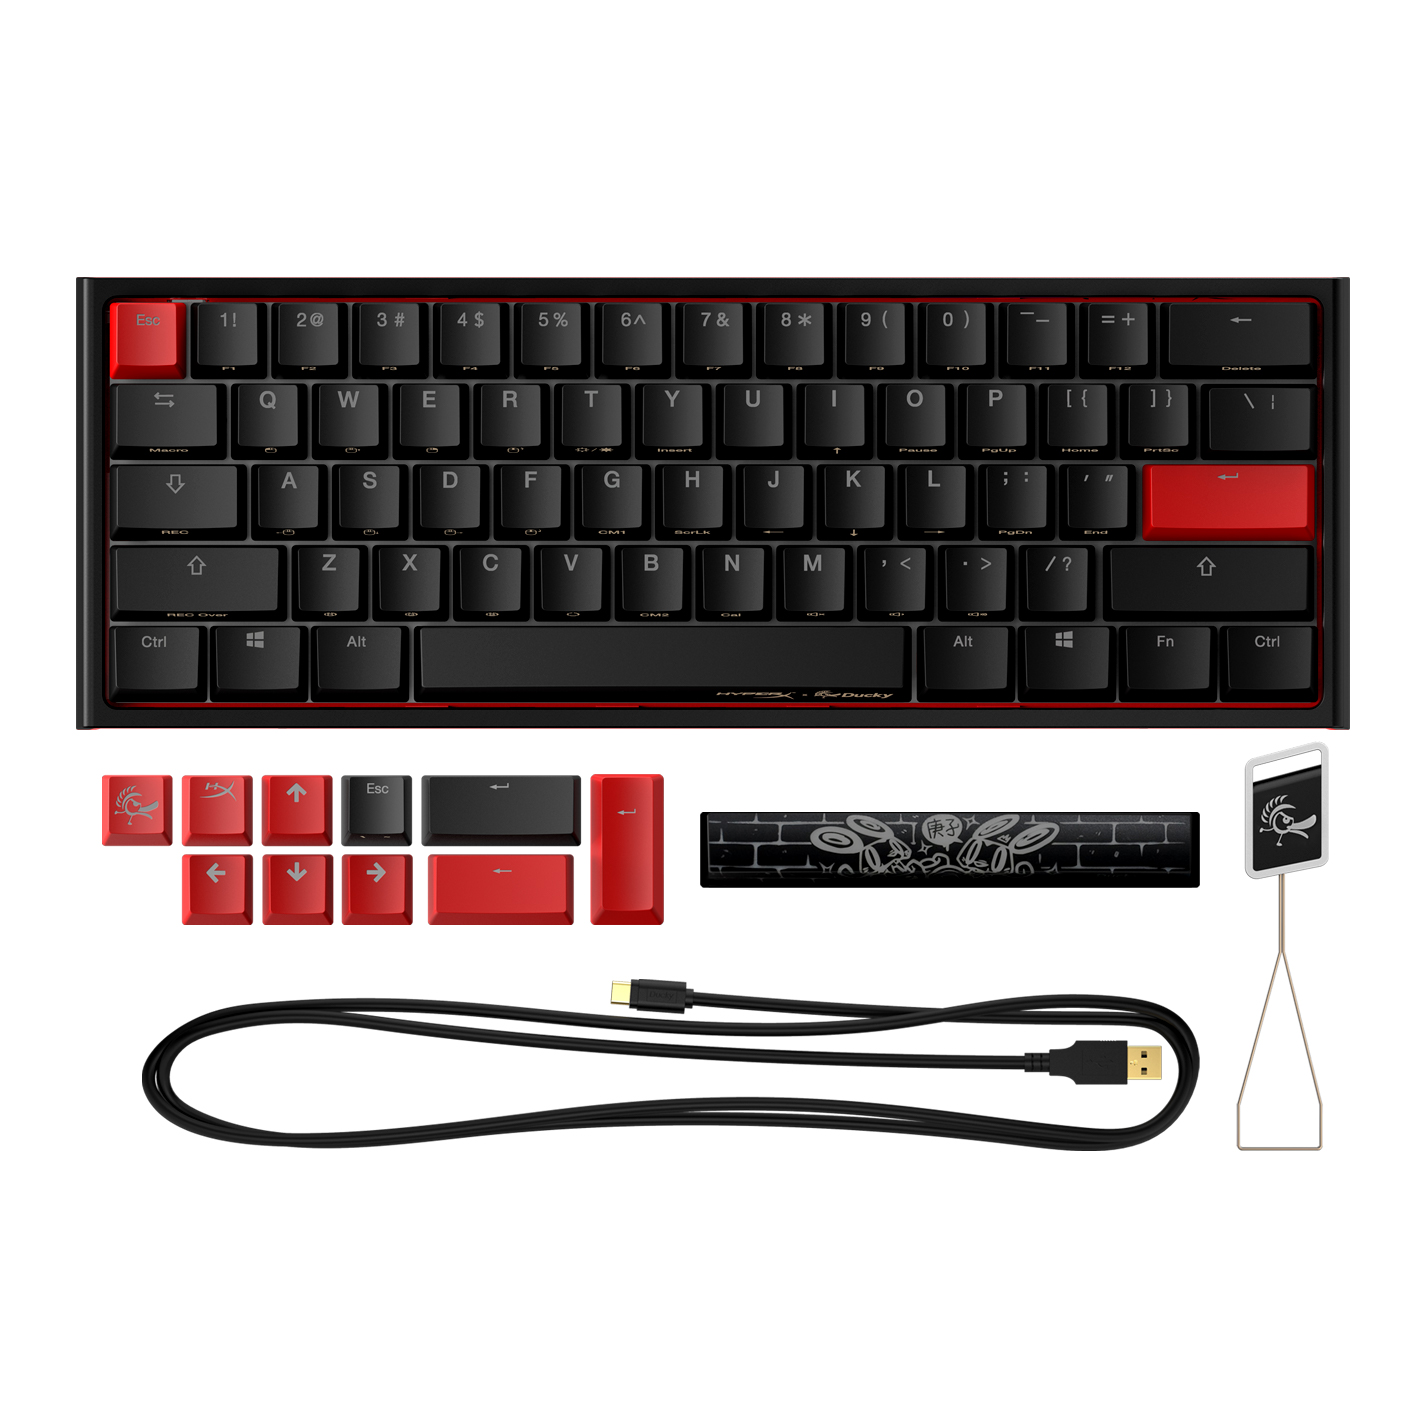 Hyperx X Ducky One 2 Mini Keyboard Price Details And Where To Buy Limited Edition Mechanical Gaming Device